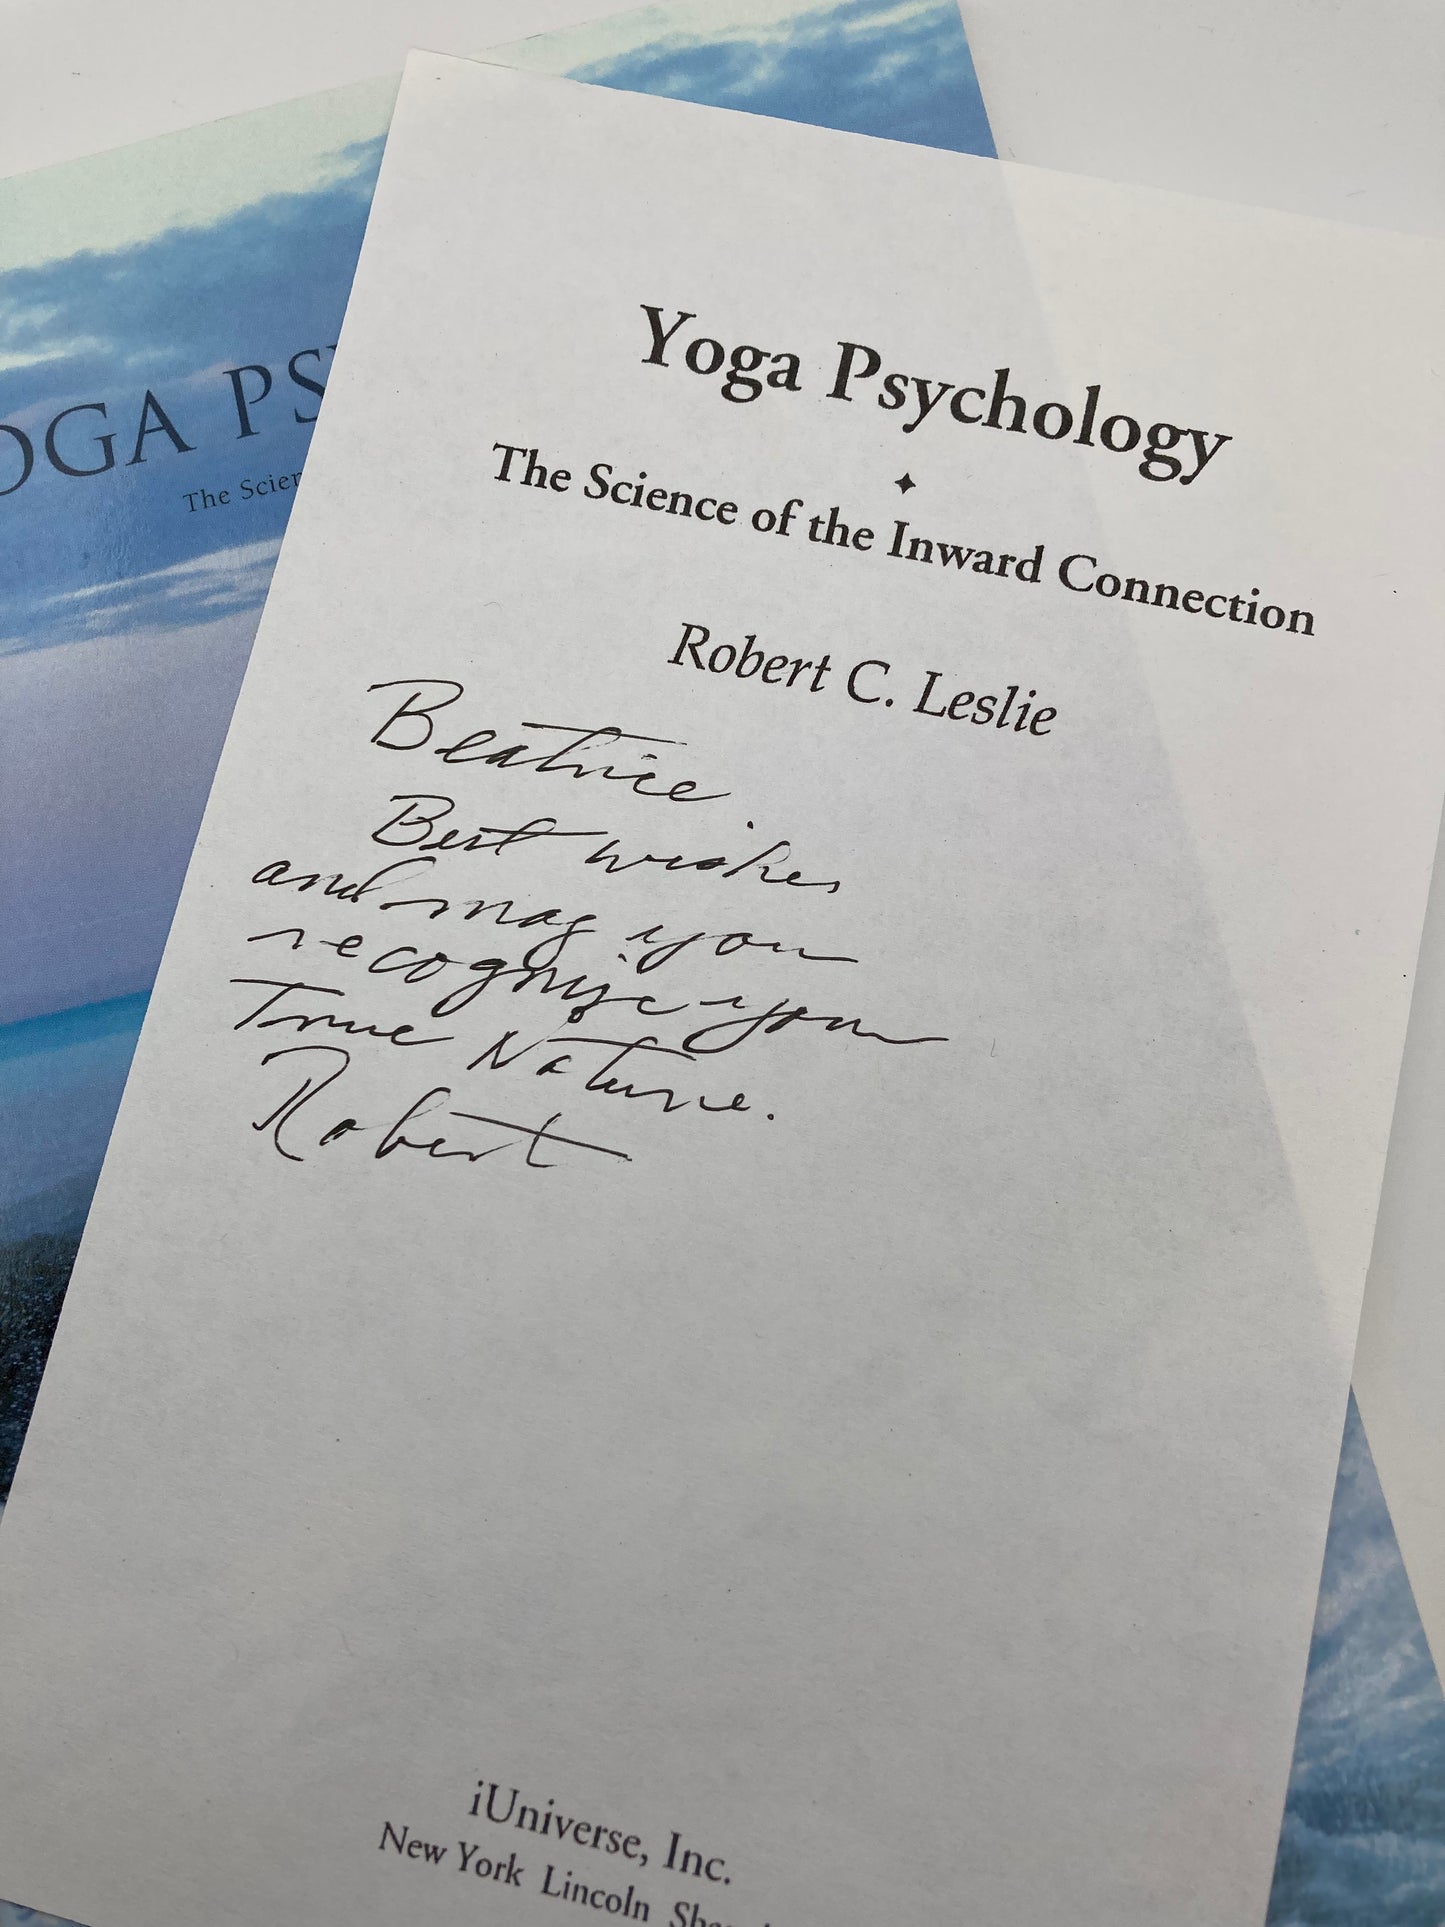 Yoga Psychology: The Science of the Inward Connection